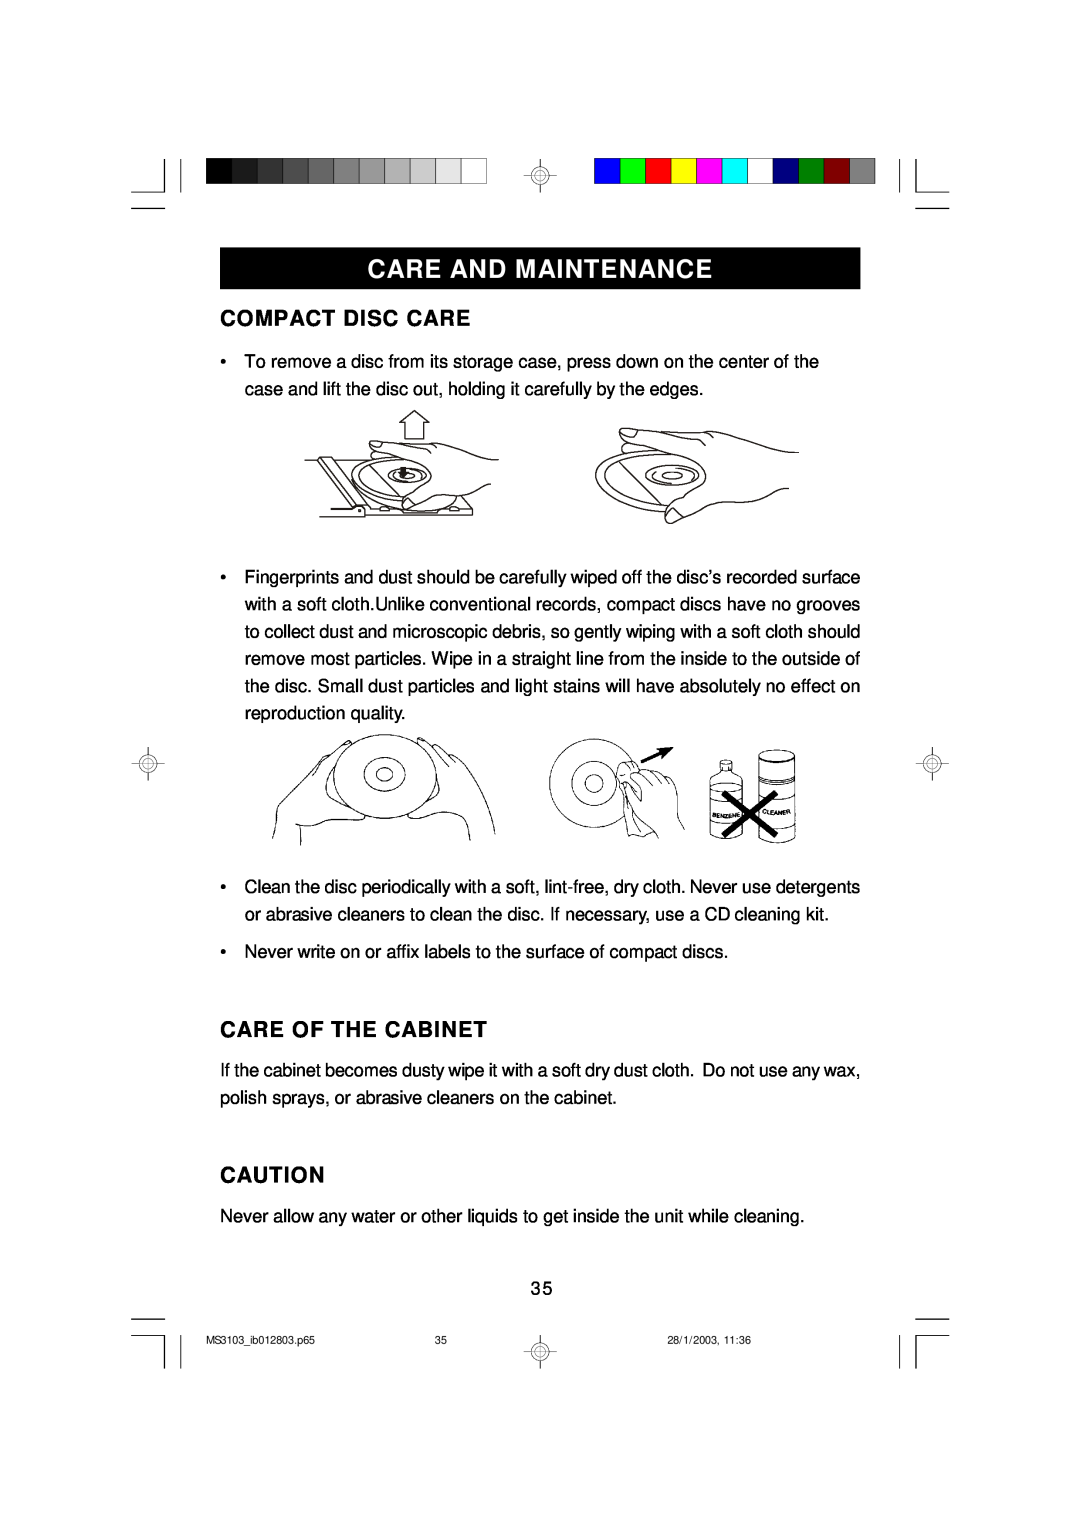 Emerson MS3103 owner manual Care And Maintenance, Compact Disc Care, Care Of The Cabinet 